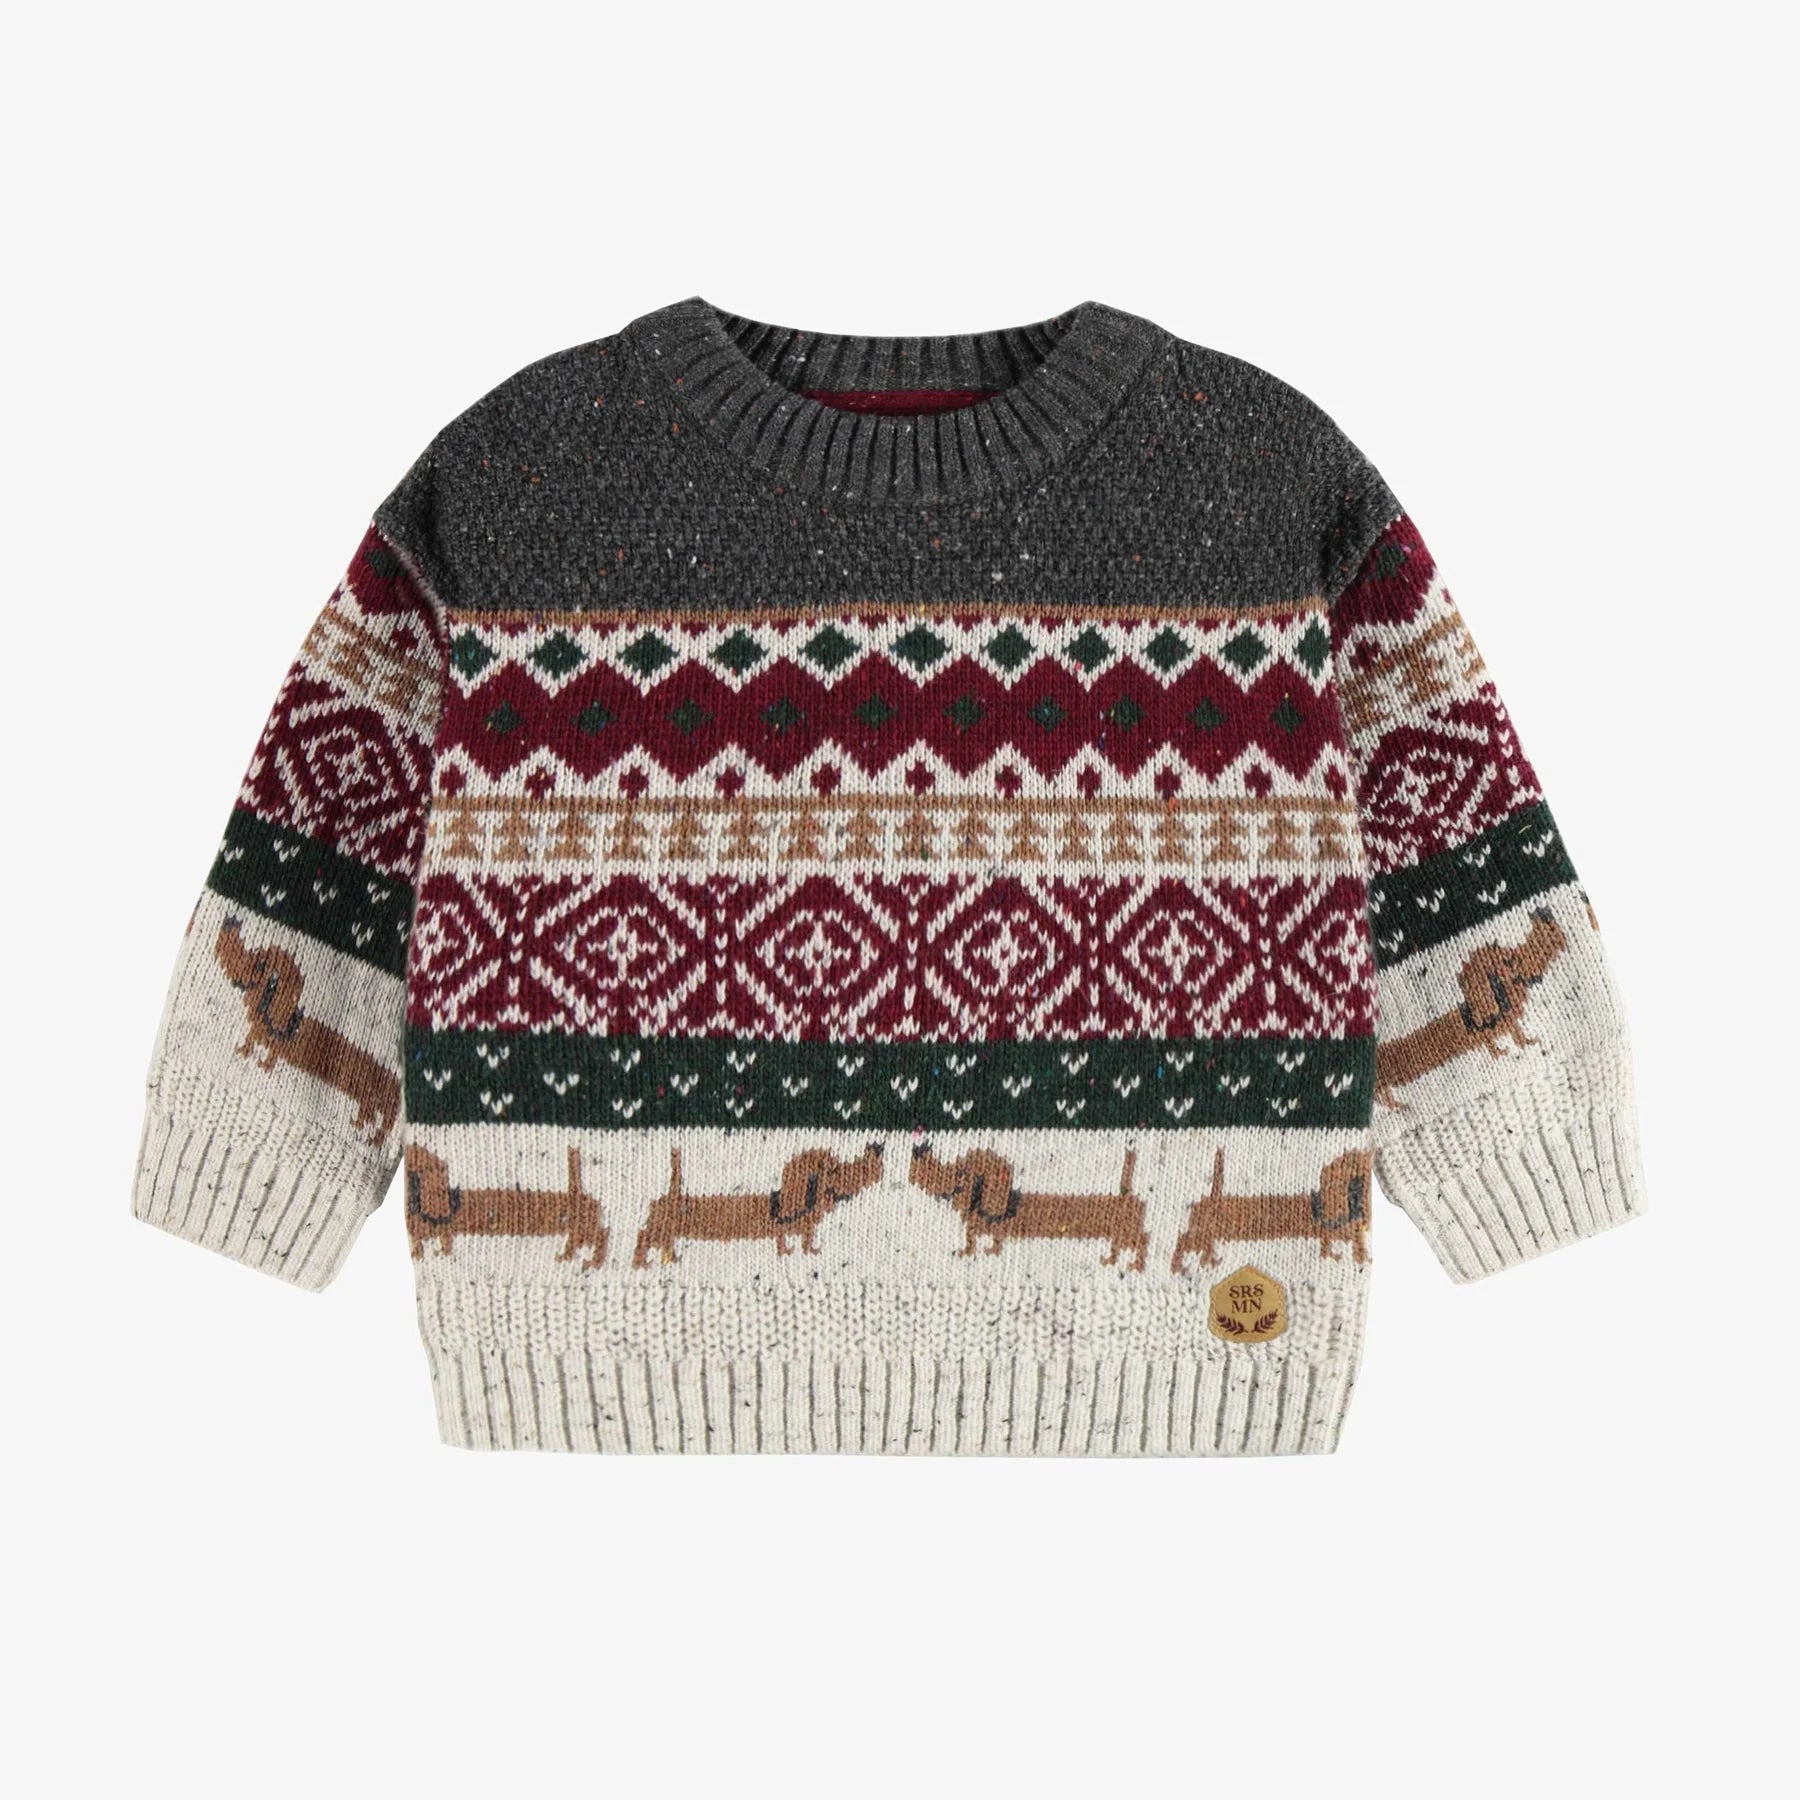 Knitted Sweater with Colorful Jacquards Pattern - Wren Harper